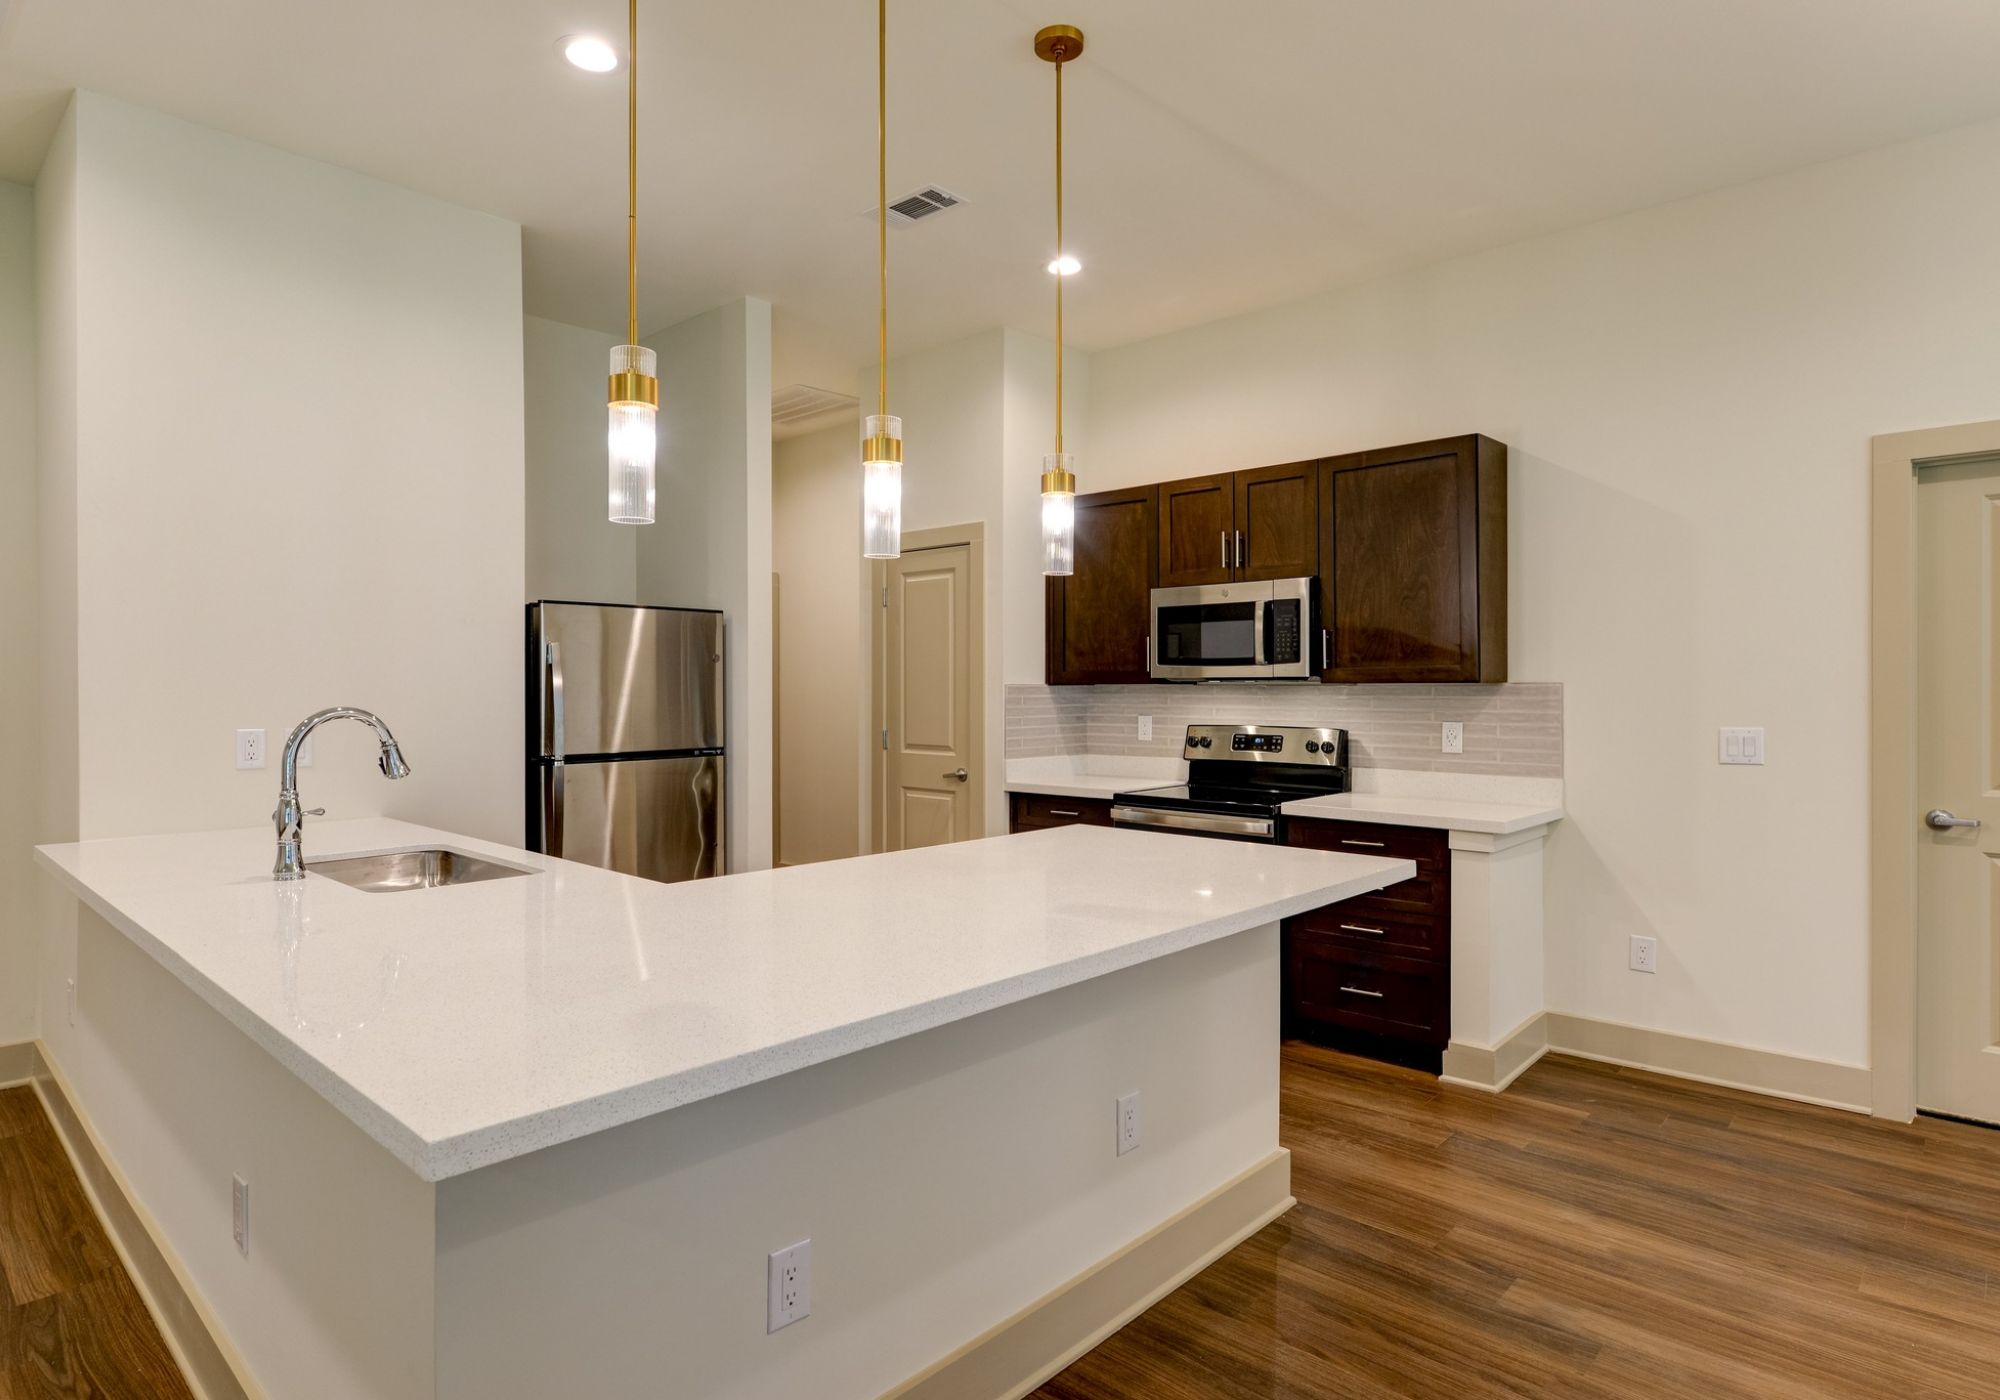 The Preserve at Meridian senior living community full kitchen with high-end finishes